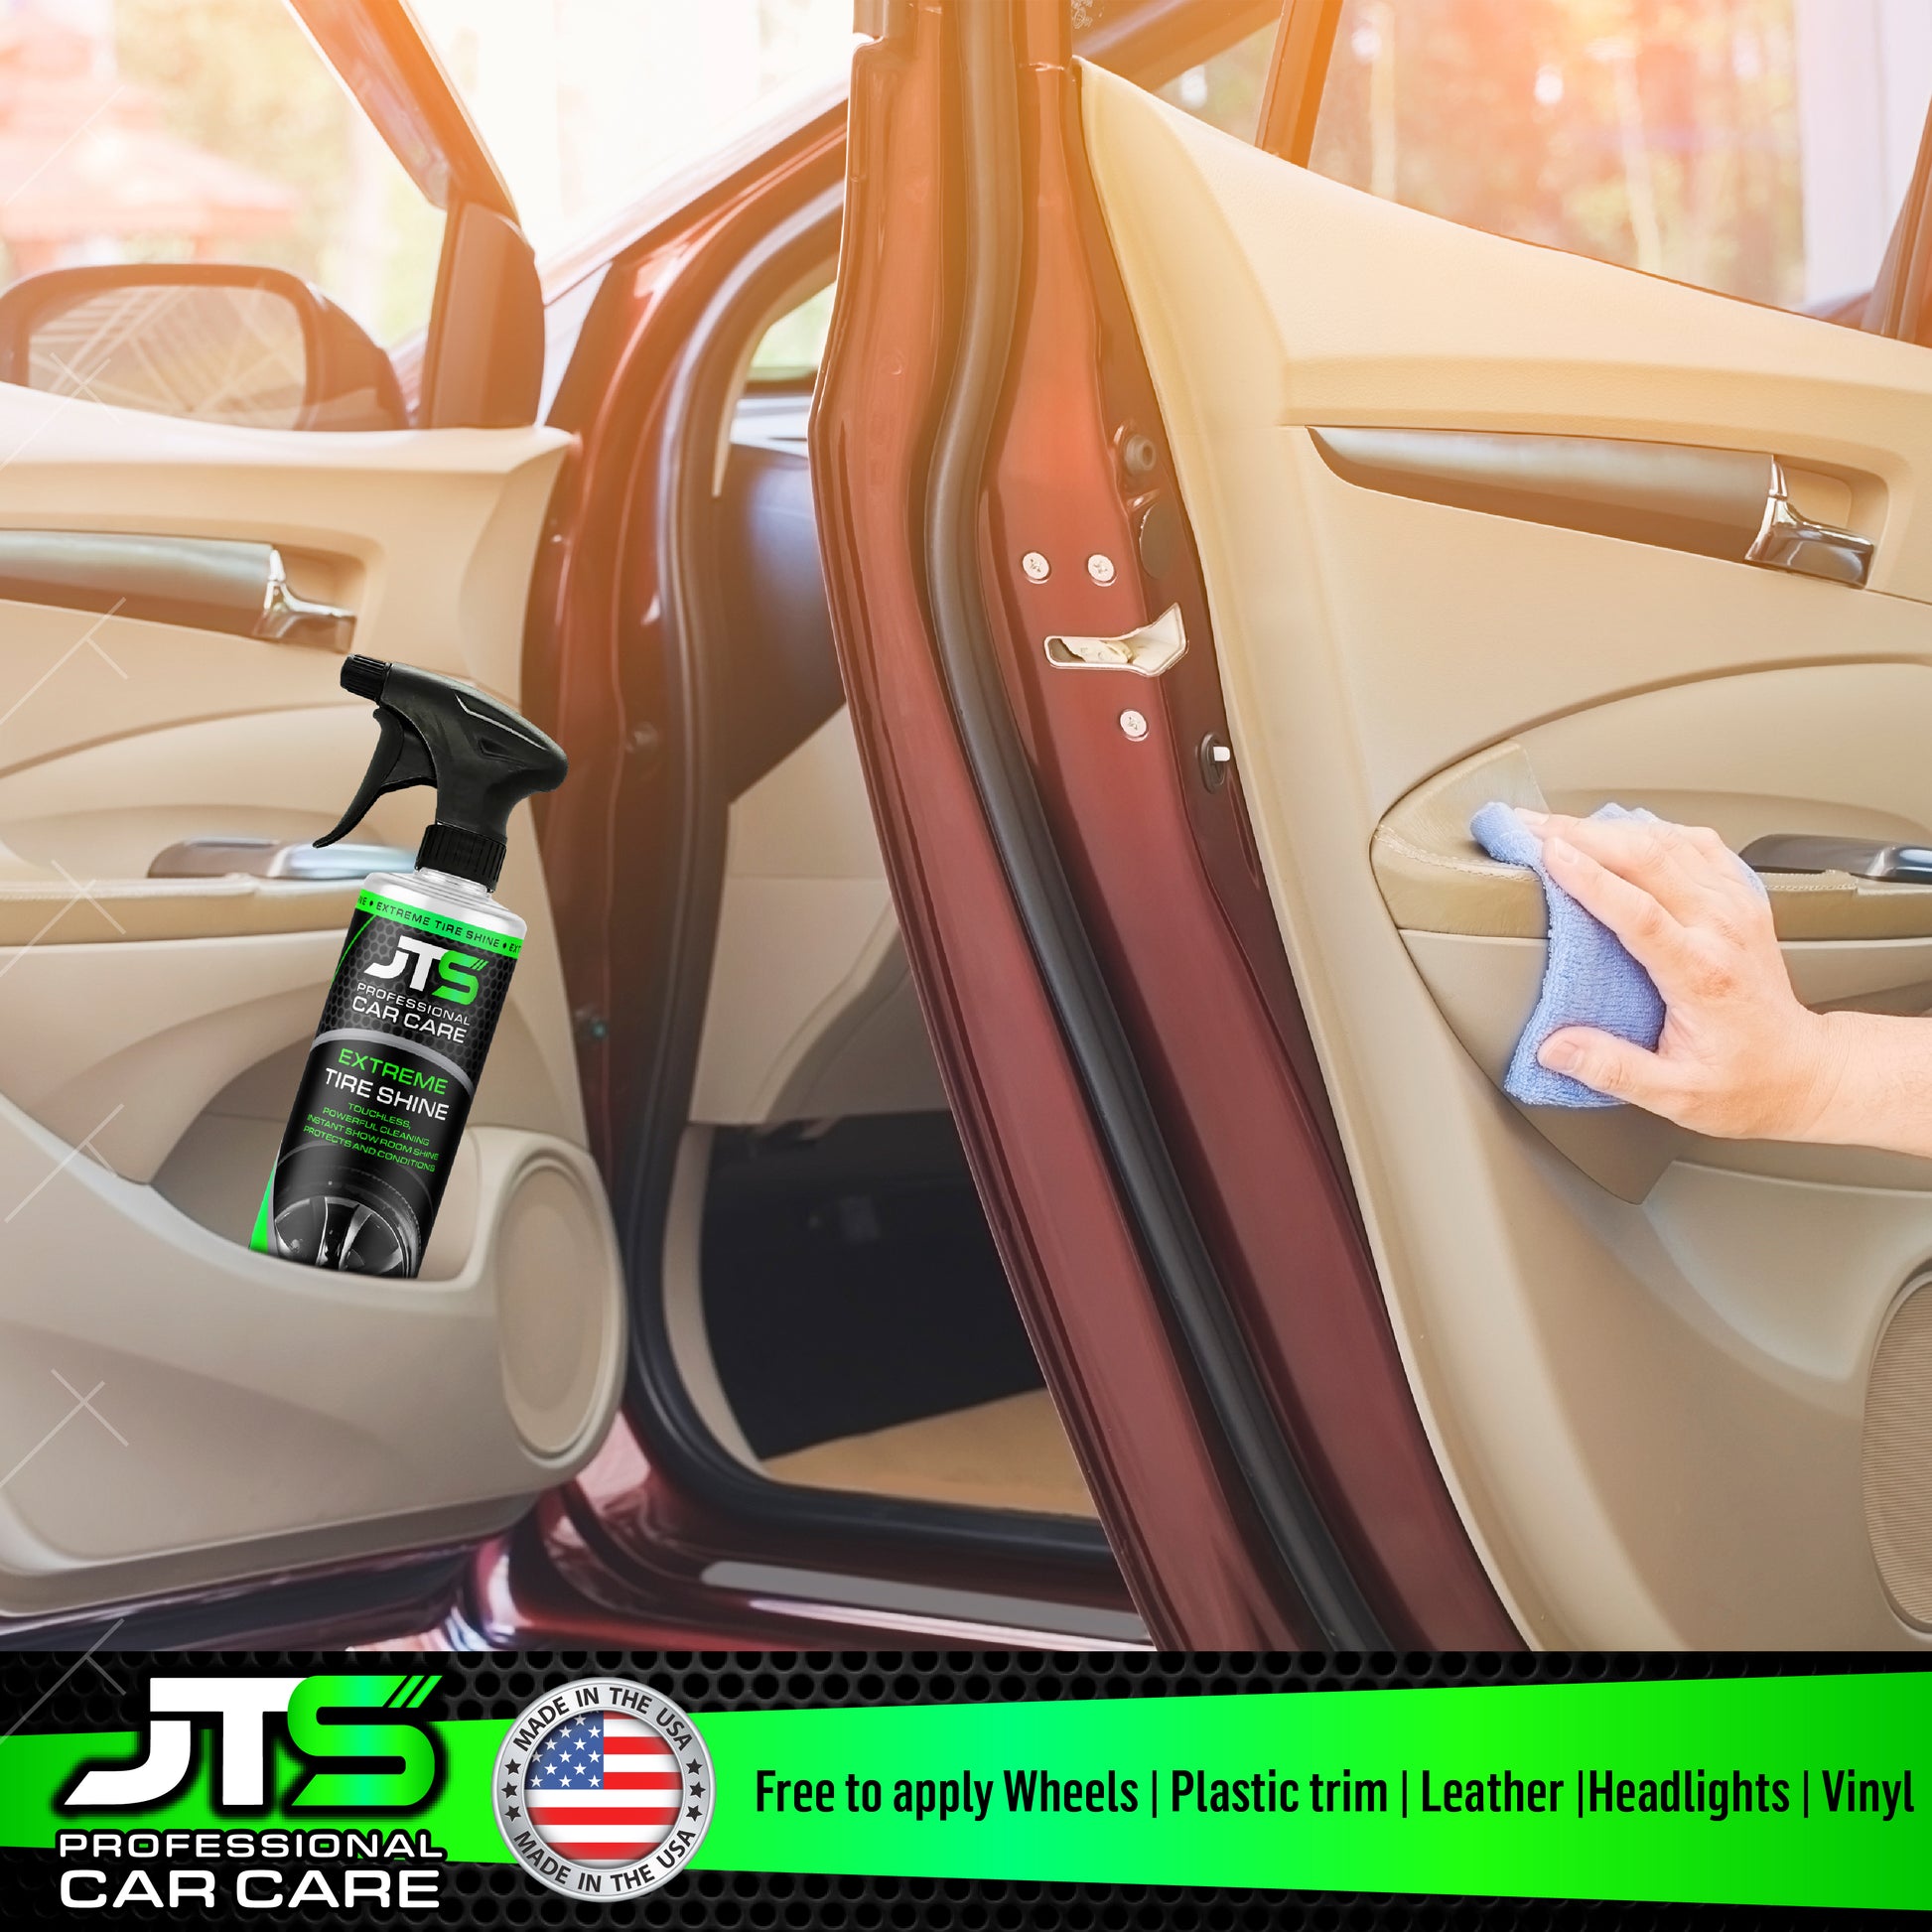 Deep Rich Jet Black Graphene Tire Shine | Non-Greasy Easy No Scrubbing Application | Max UV Protection - Stop Dry Rotting - 2 Bottles - Torque Detail